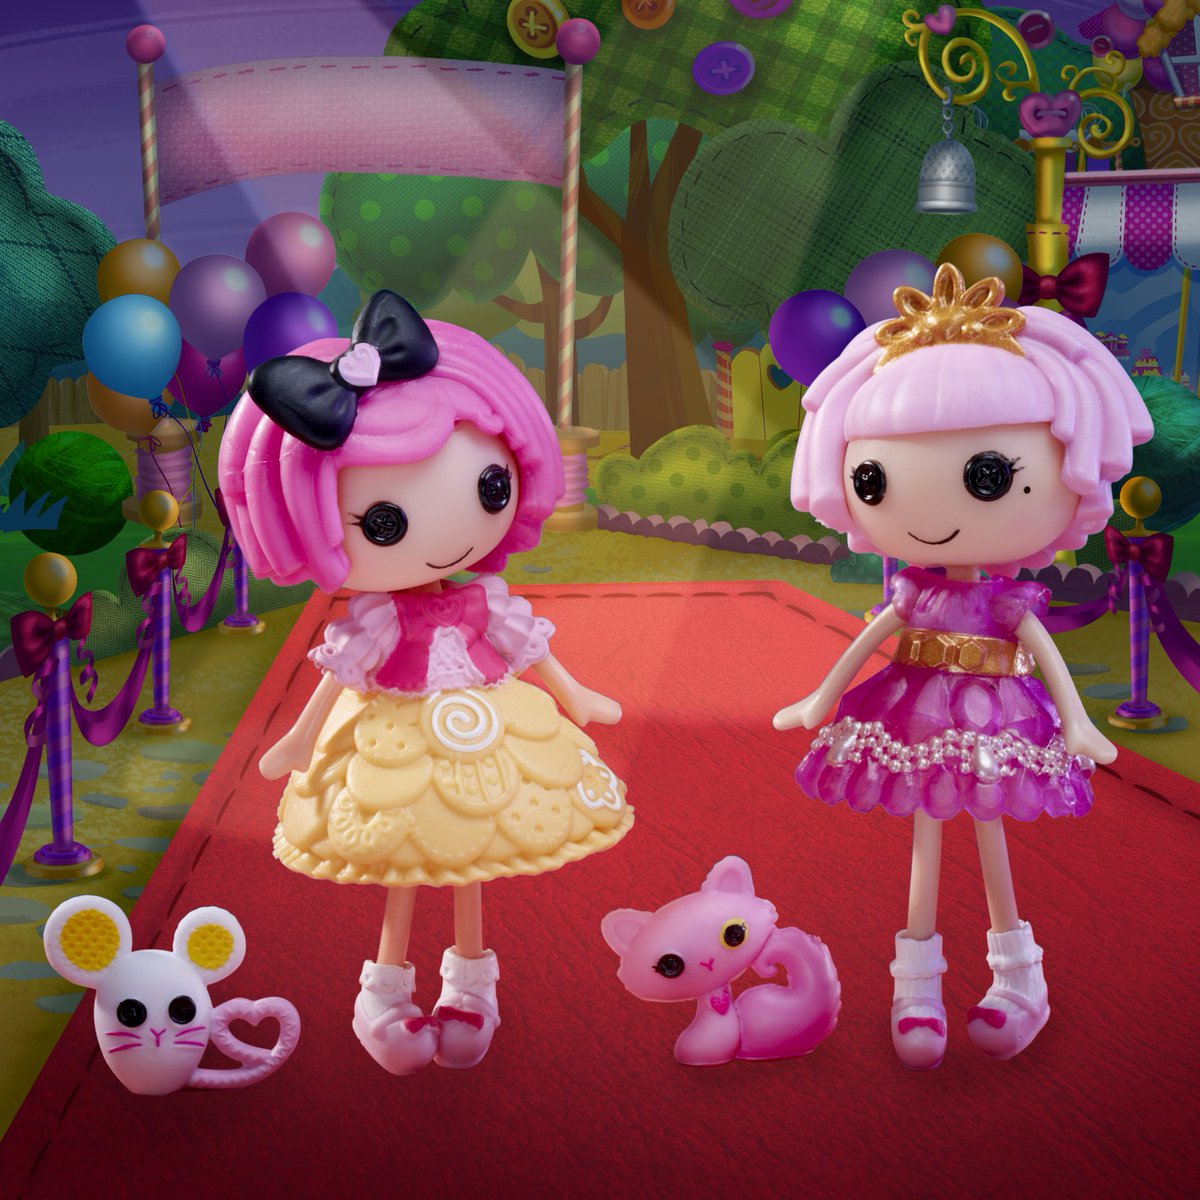 Watch We’re Lalaloopsy on Netflix to find out! 